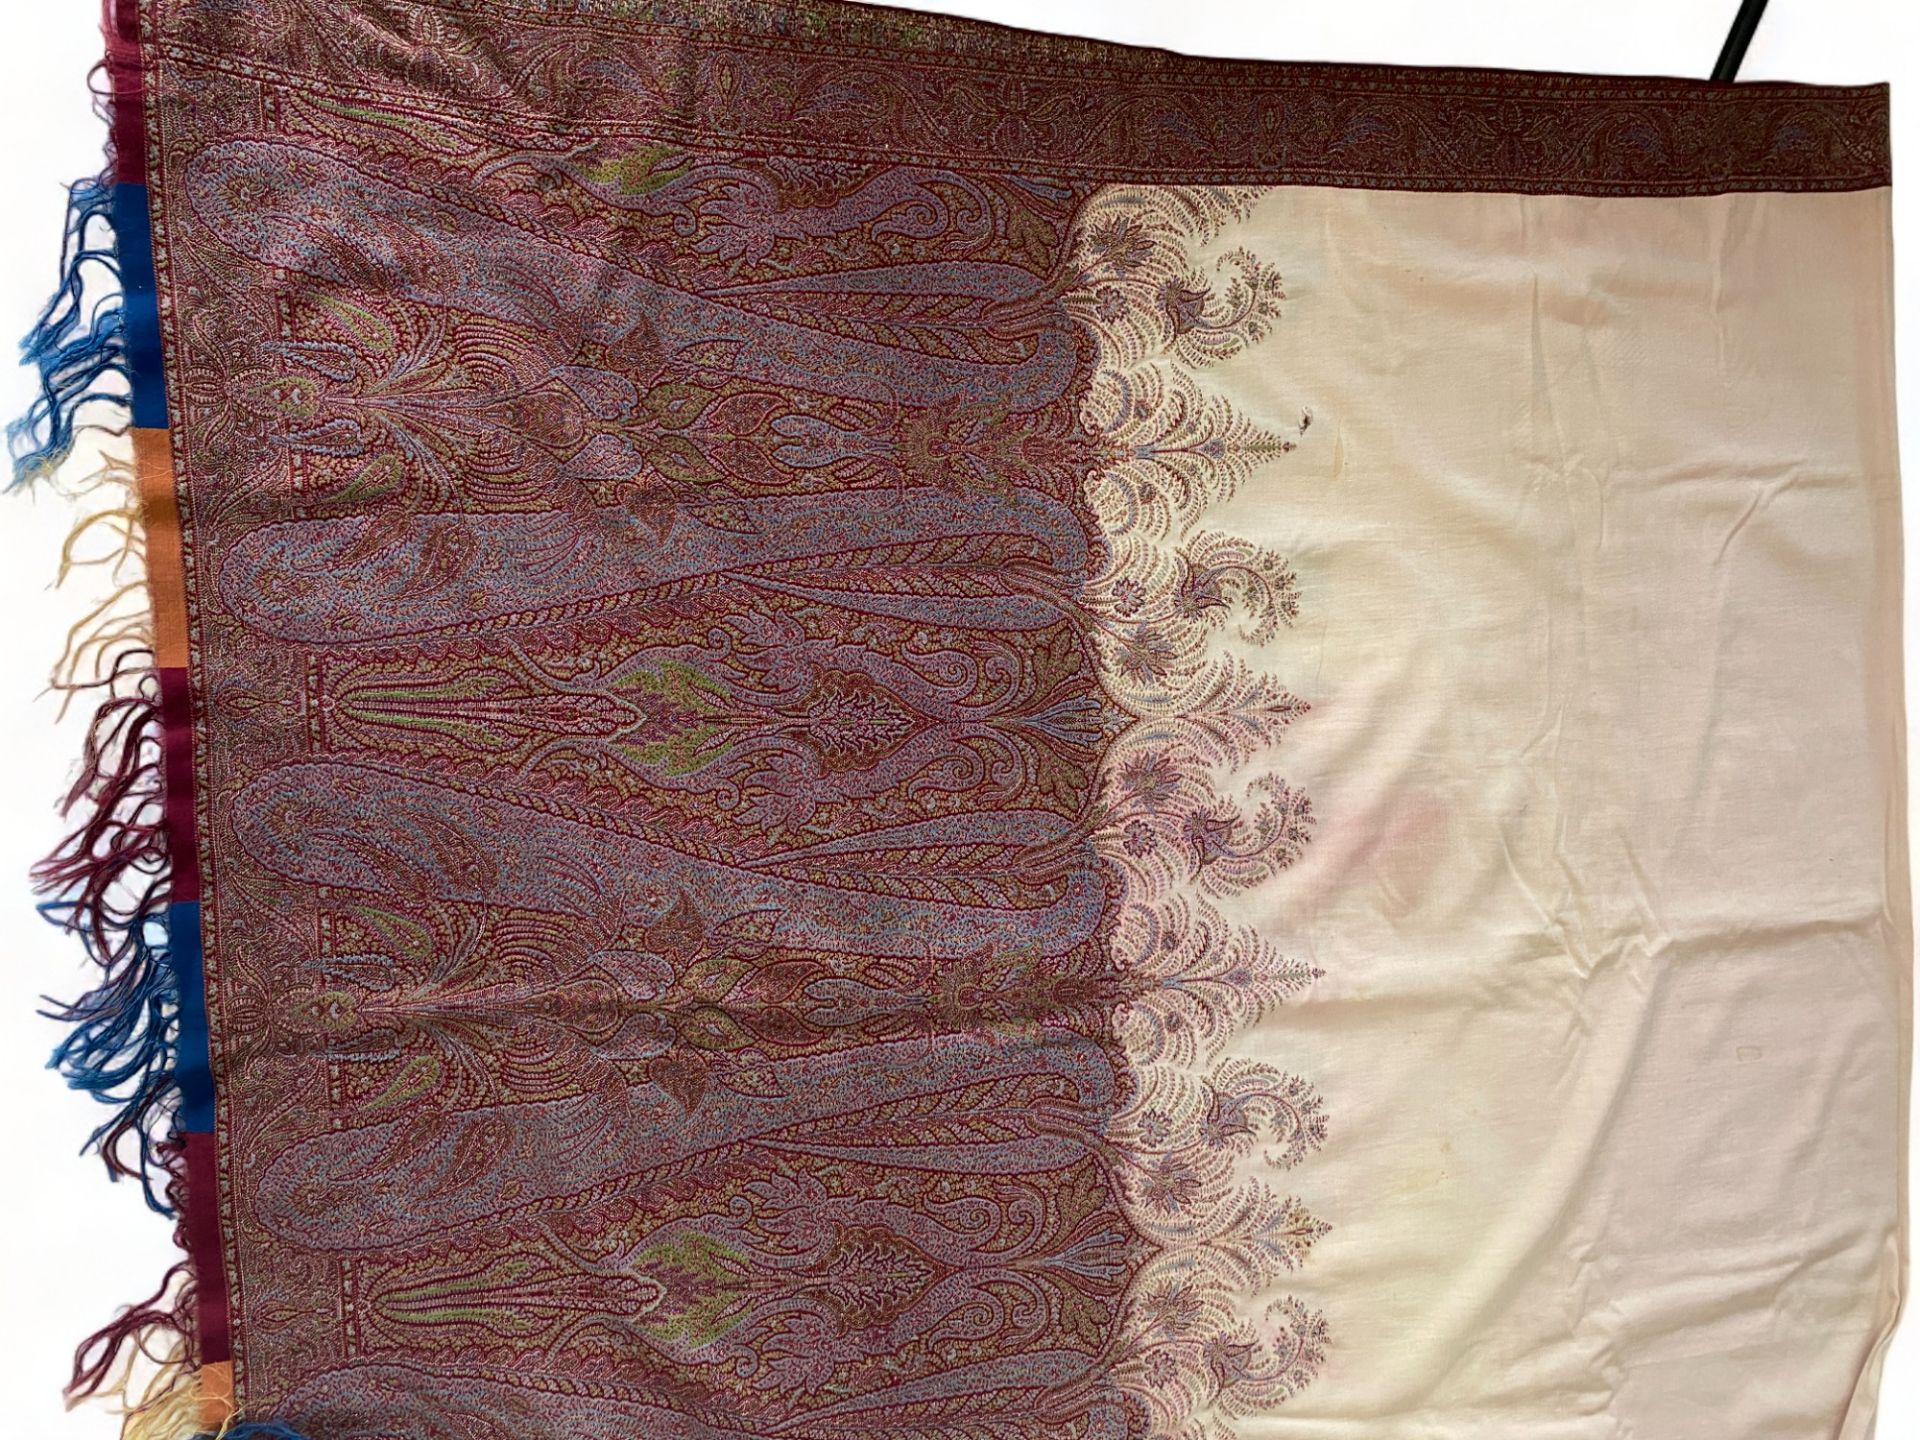 A 19th century red, brown and blue paisley cotton shawl together with another shawl - Image 8 of 13